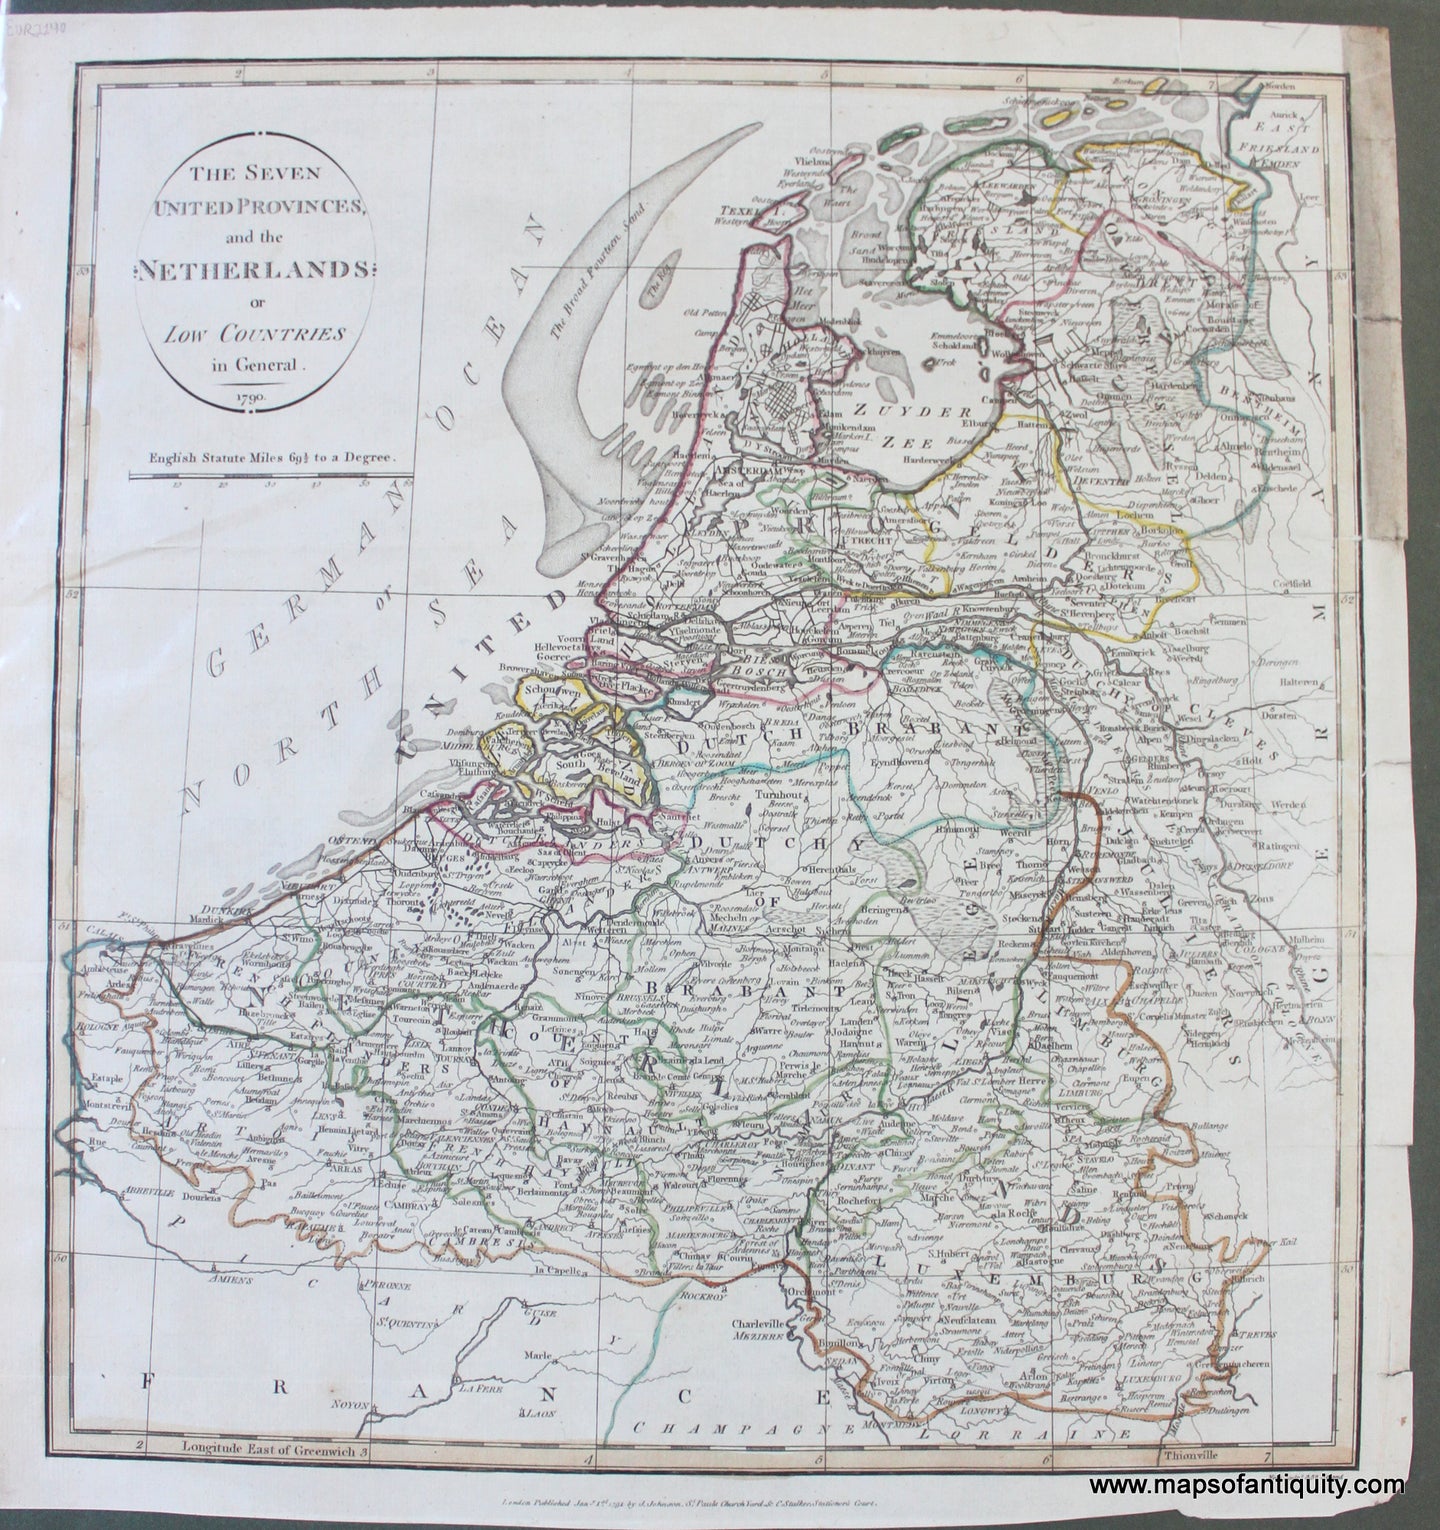 Antique-Hand-Colored-Map-The-Seven-United-Provinces-and-the-Netherlands-or-Low-Countries-in-General-Europe-Holland-&-The-Netherlands-1791-Johnson-Maps-Of-Antiquity